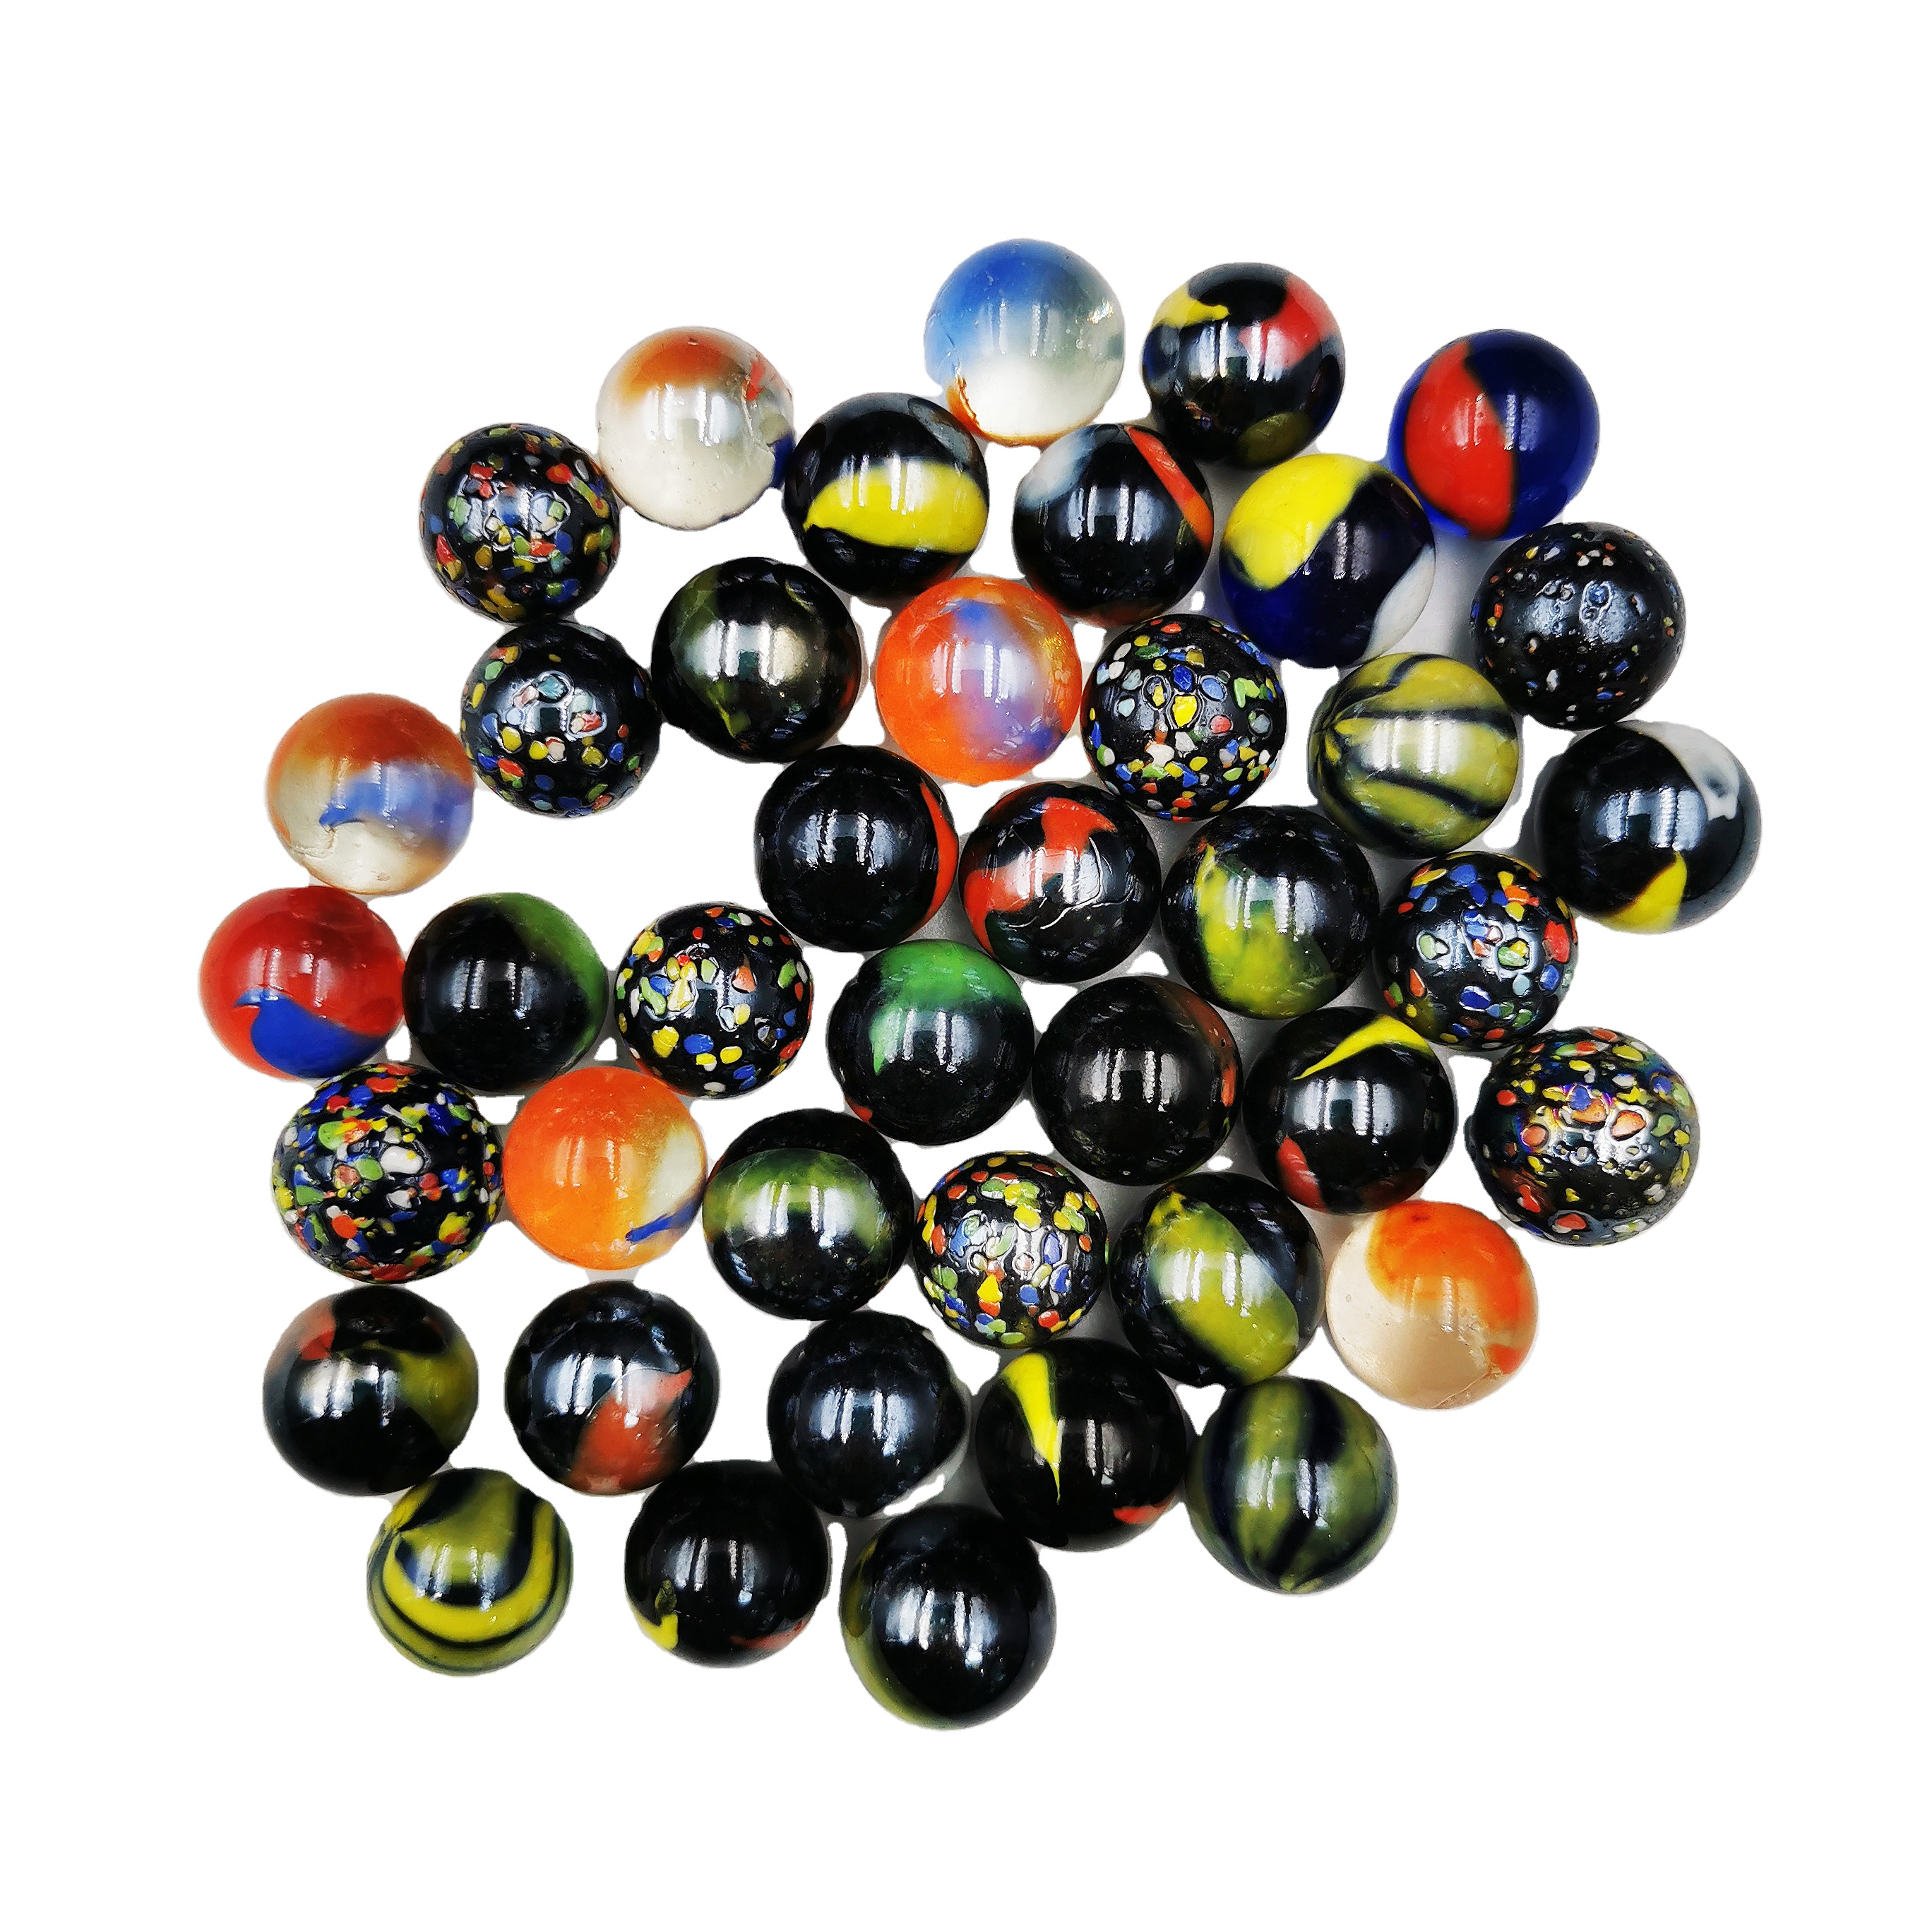 16mm playing glass marble ball for toys, Children toys cat eye glass marbles